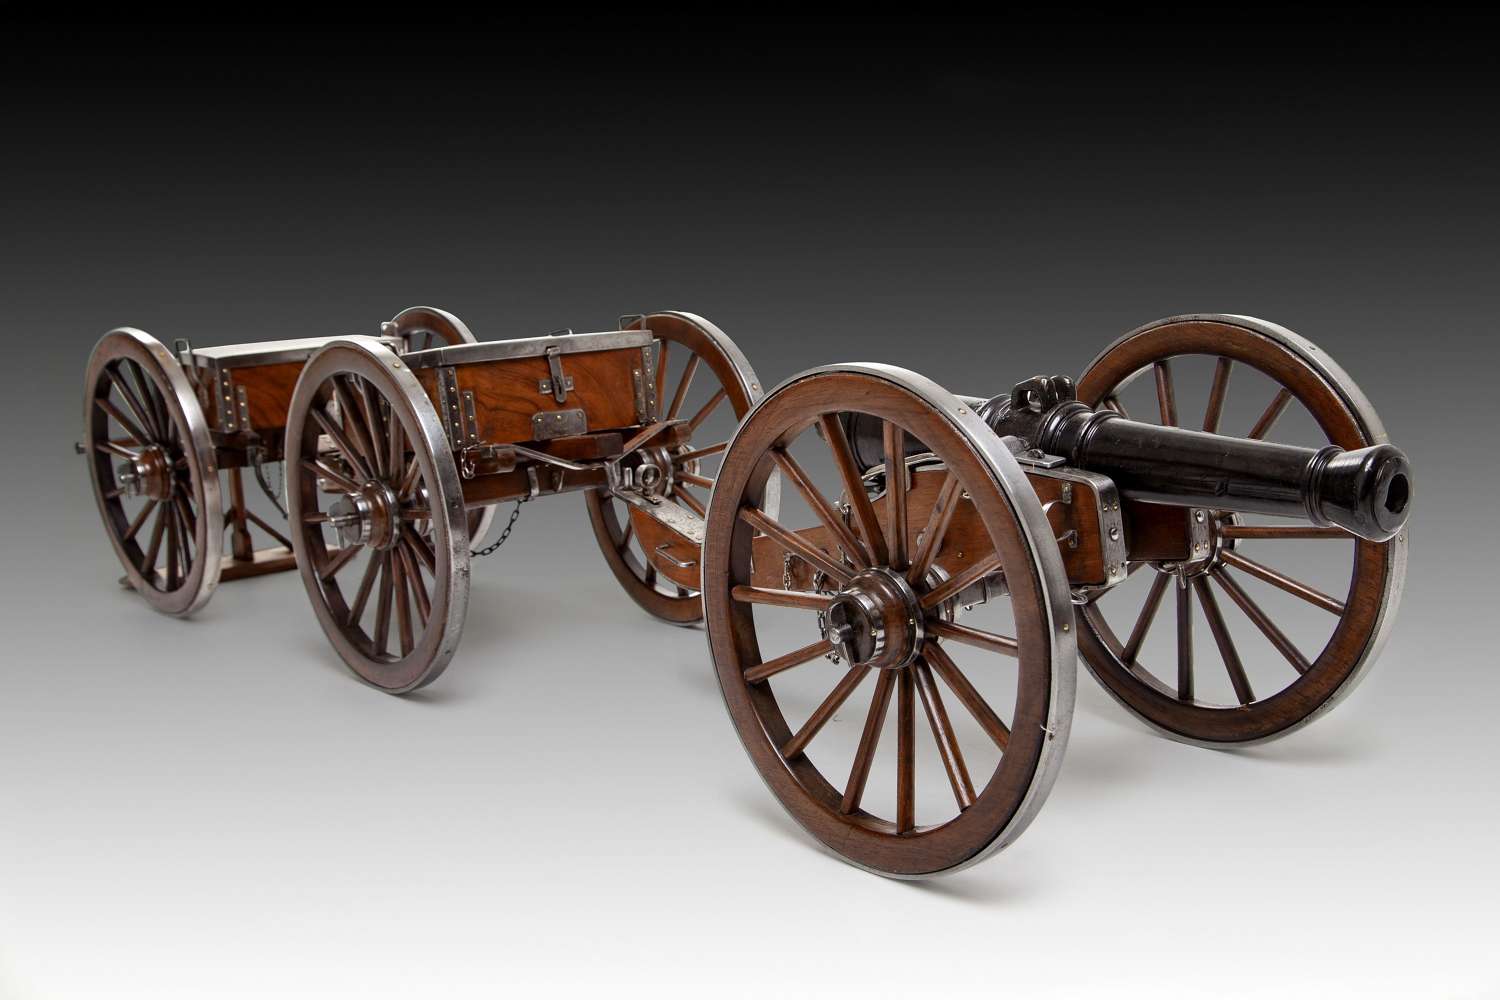 A 19th century model of a canon and carriages